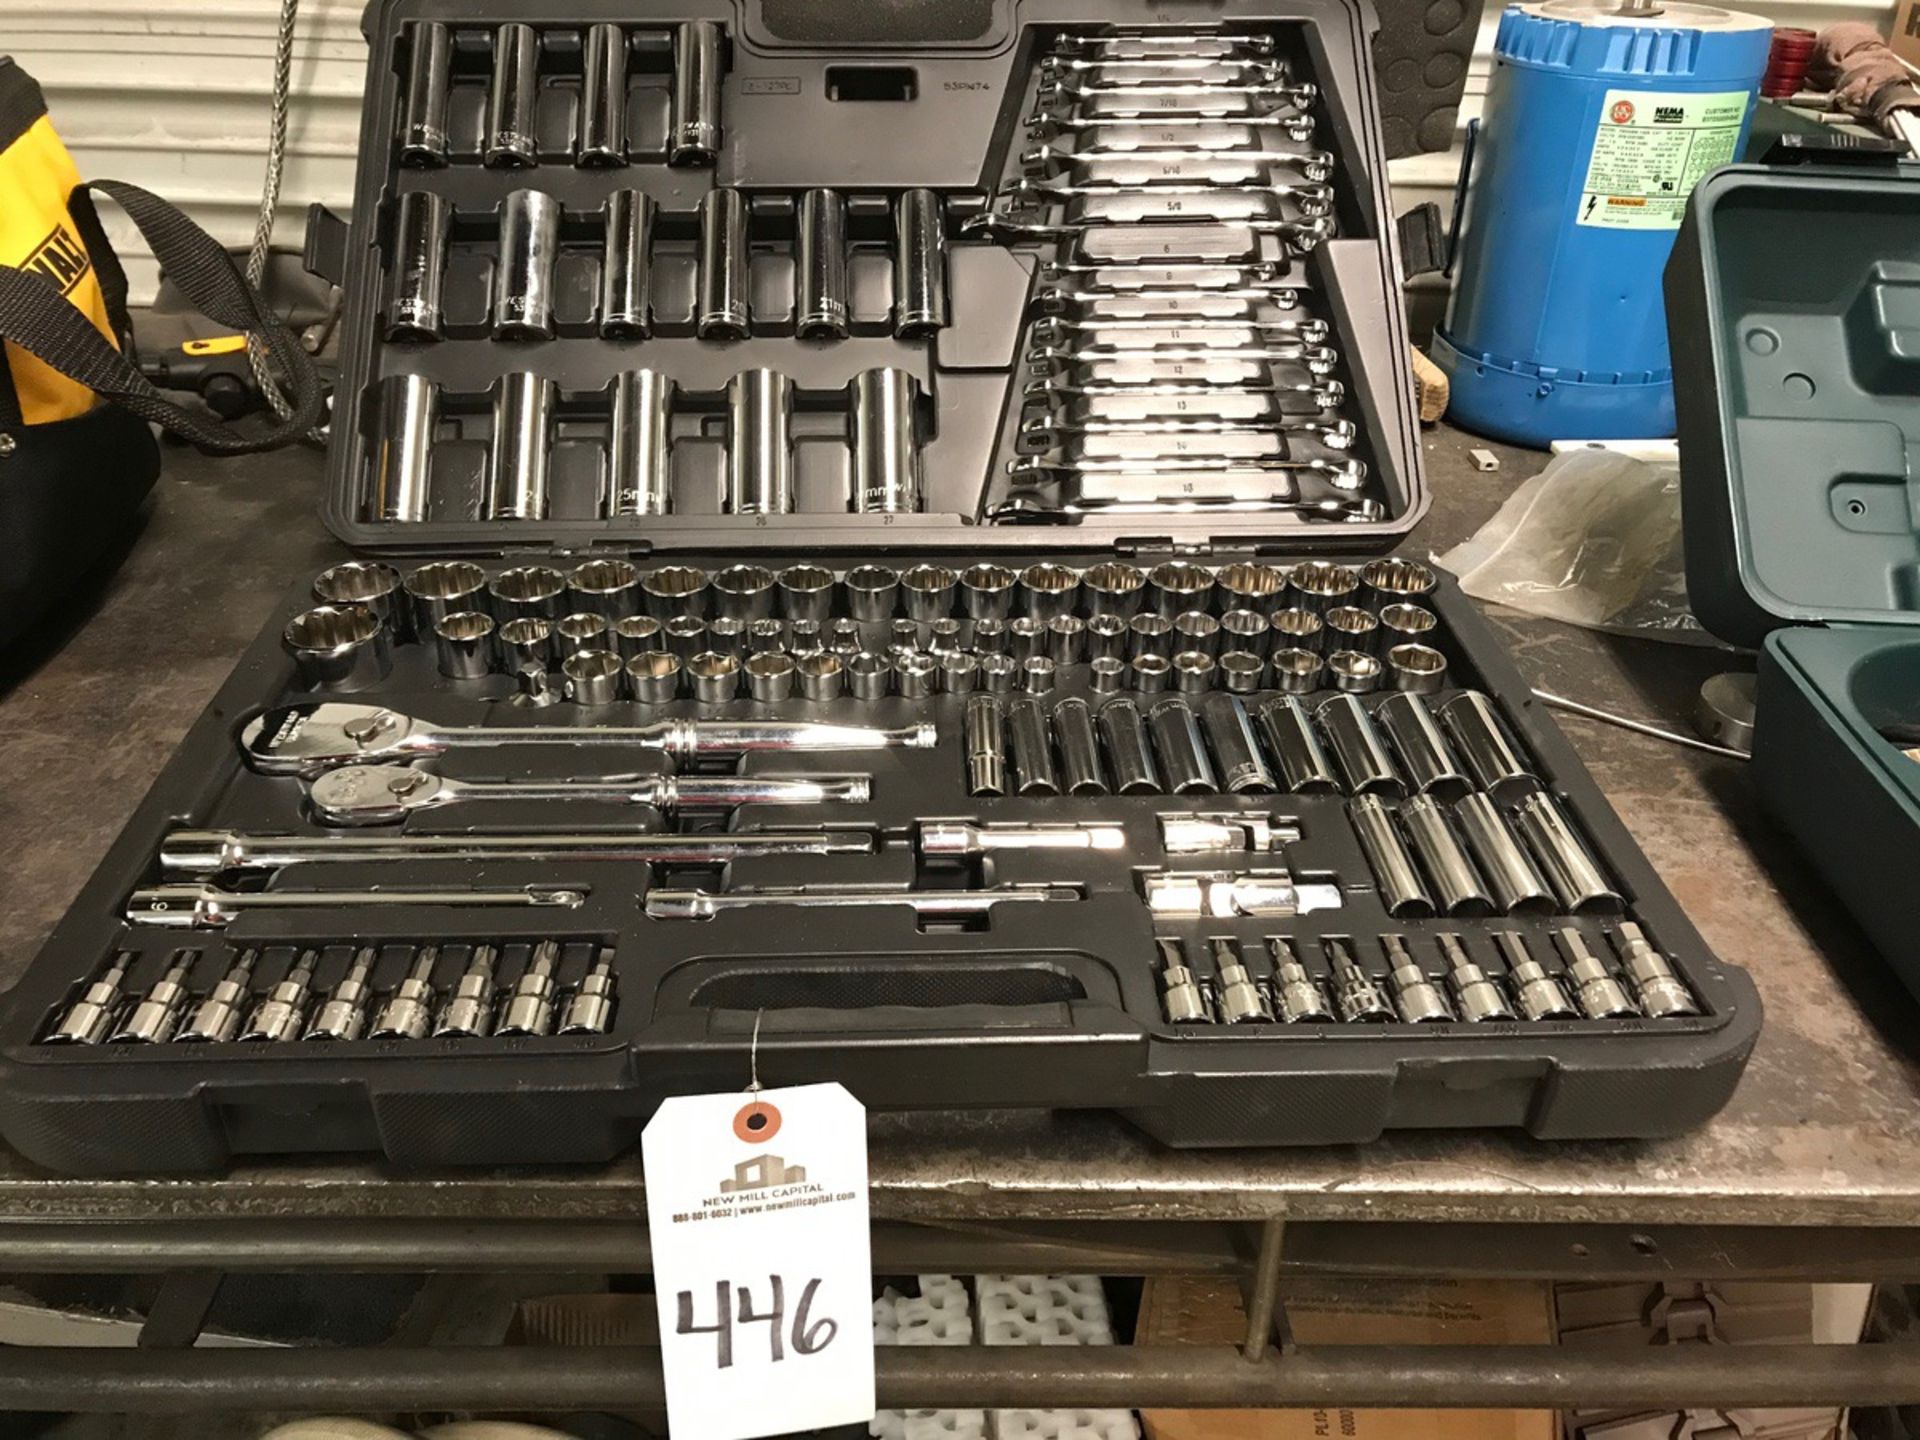 WESTWORD SOCKET AND WRENCH SET | Rig Fee: $25